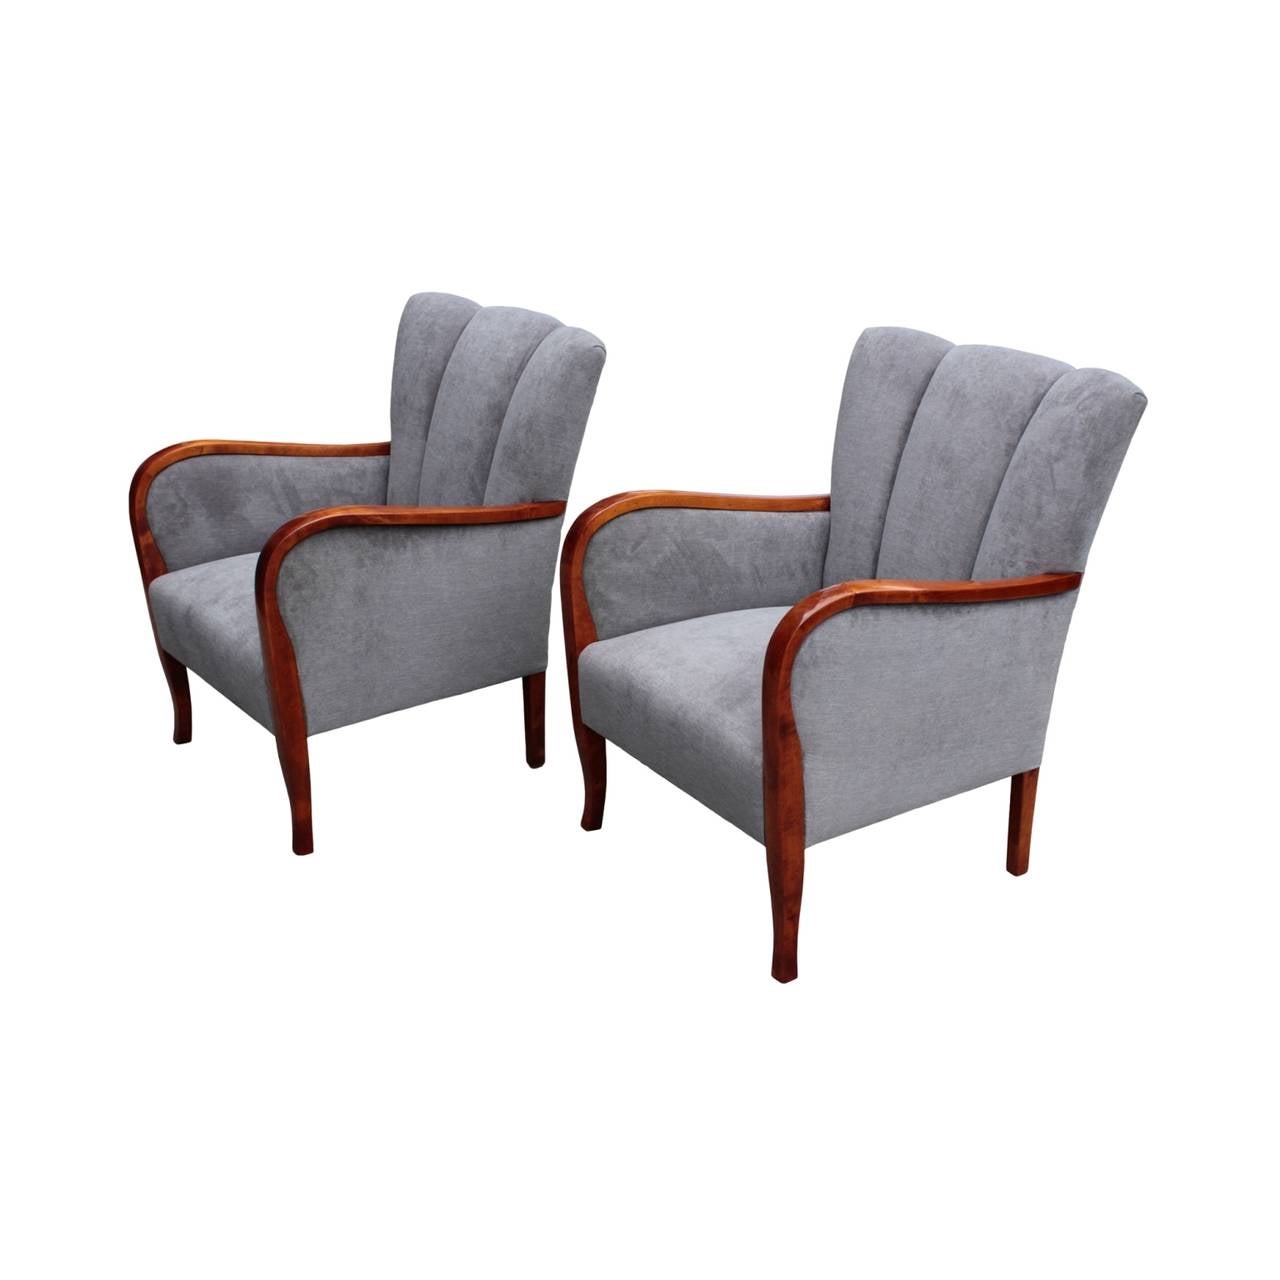 Well-designed pair having slim and elegant curvilinear frames, arms with wider central portion for added comfort ending in very subtle cabriole shaped, slender and tall legs. Twice channeled, waist shaped back rests. In flame birch.